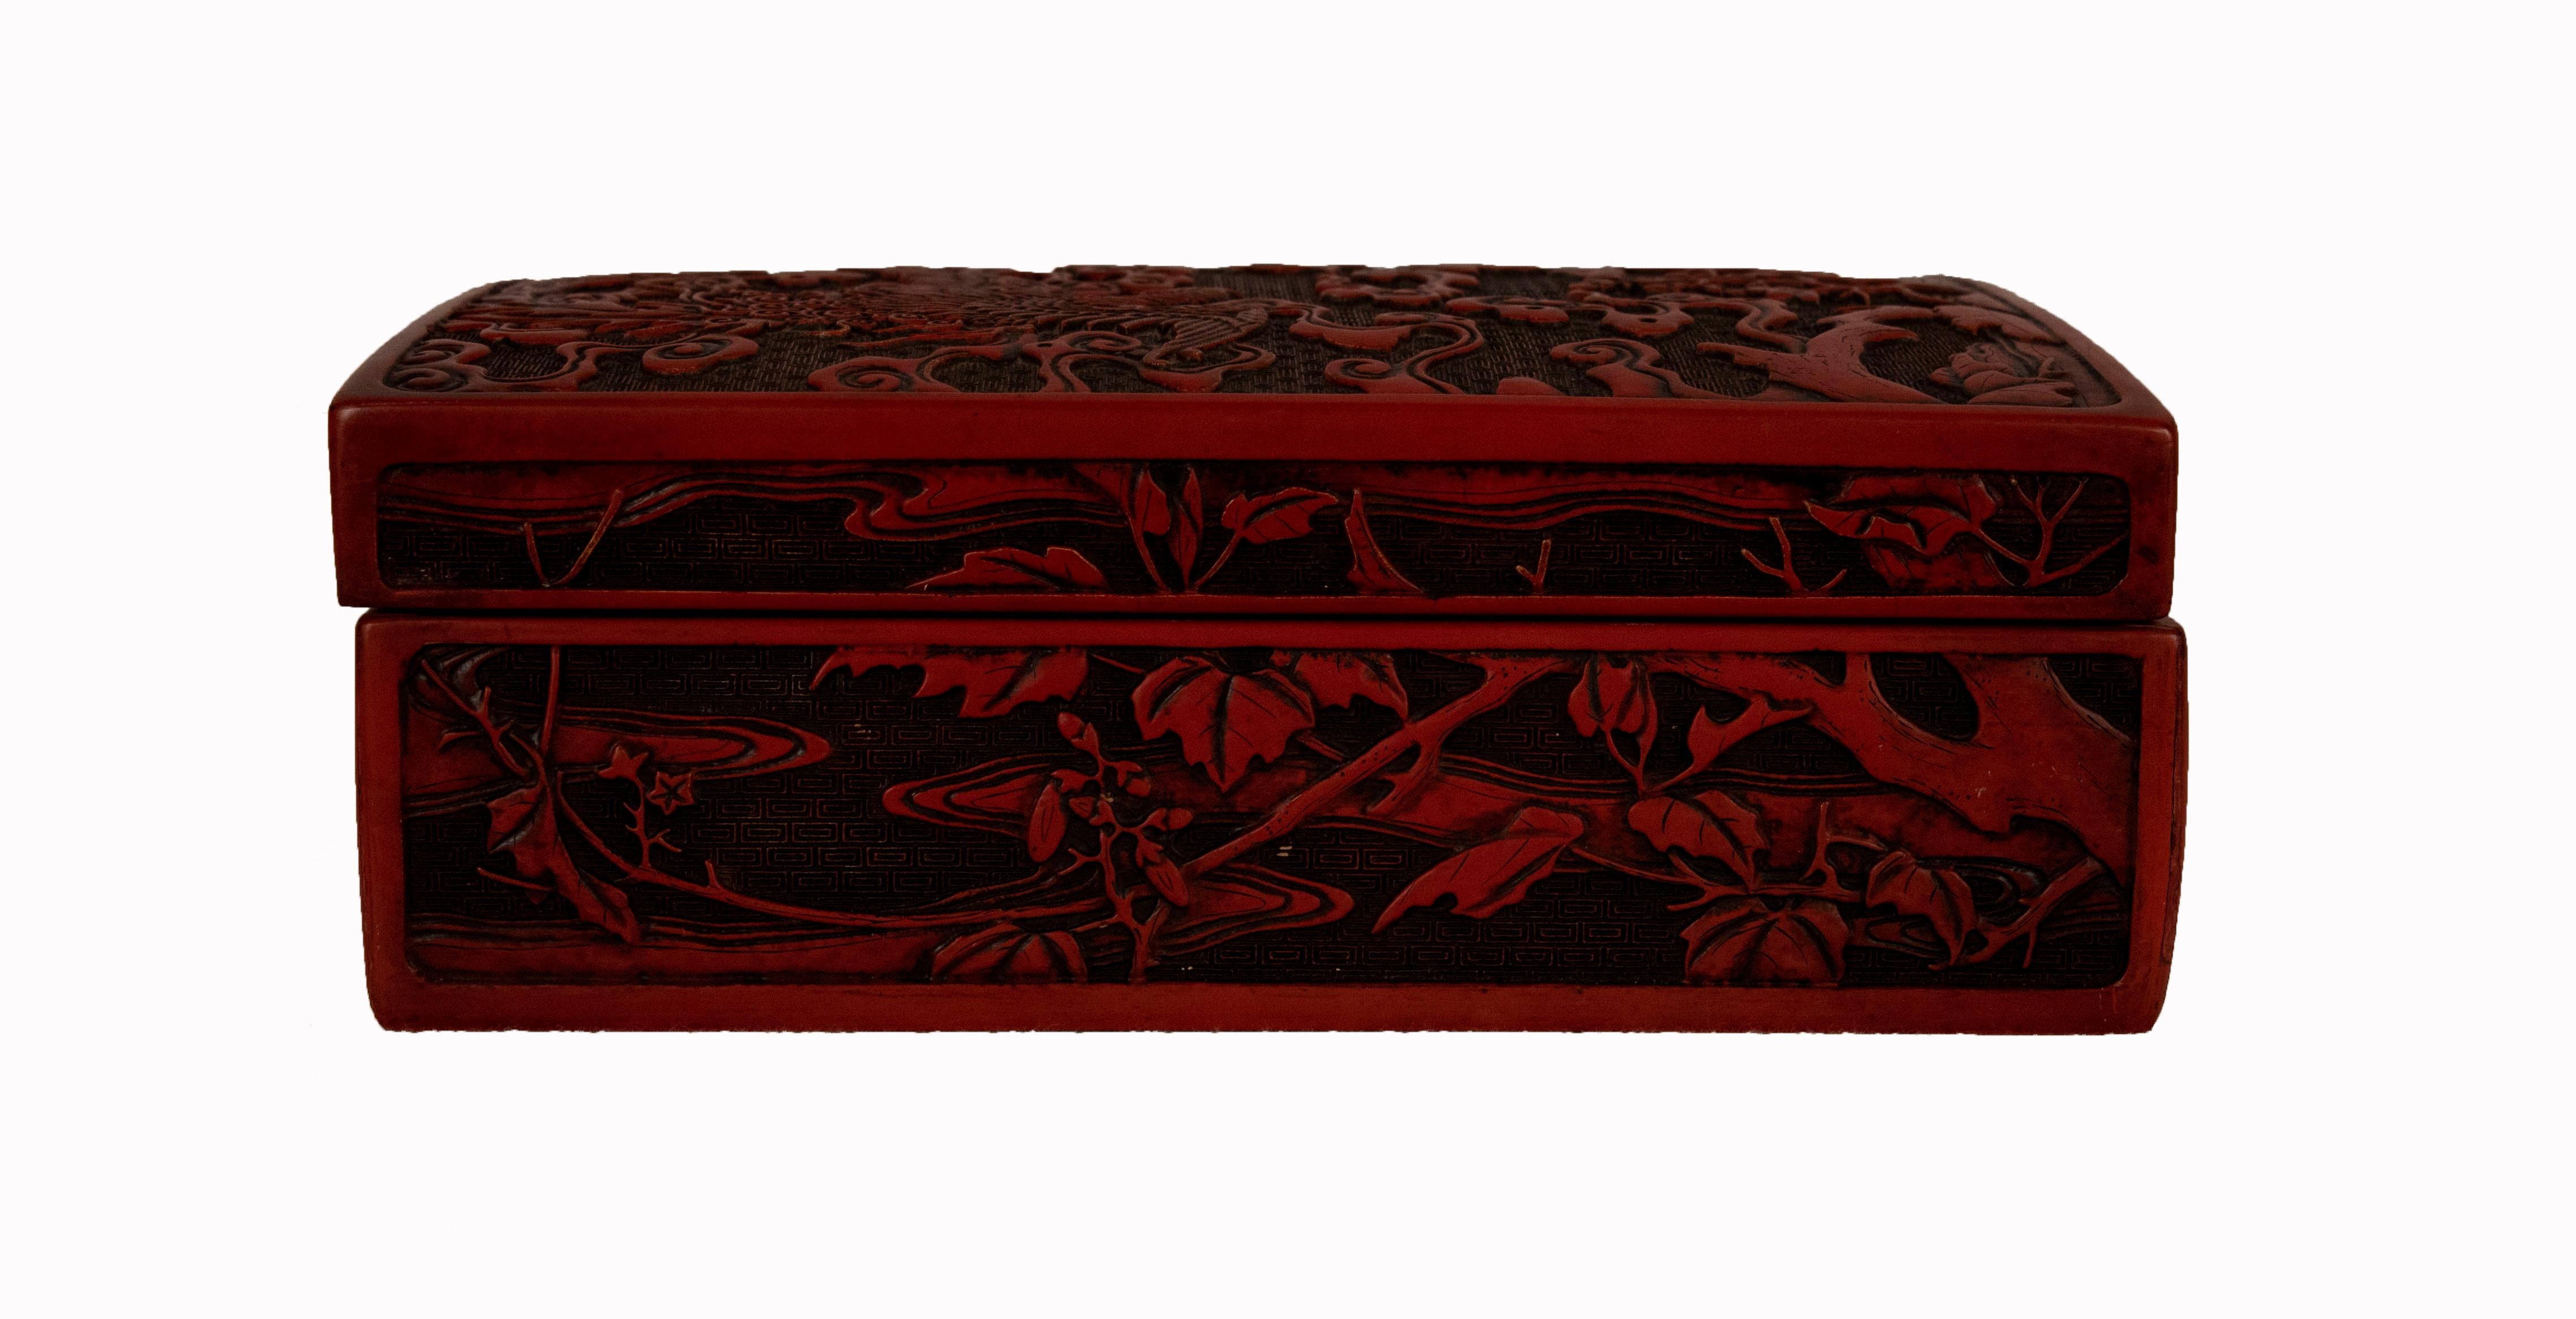 Chinese rectangular hand carved cinnabar box. The lid depicts a flying phoenix or Fenghuang surrounded by clouds above a landscape. The box was made in China circa 1900 and has a red exterior and a black lacquered interior.